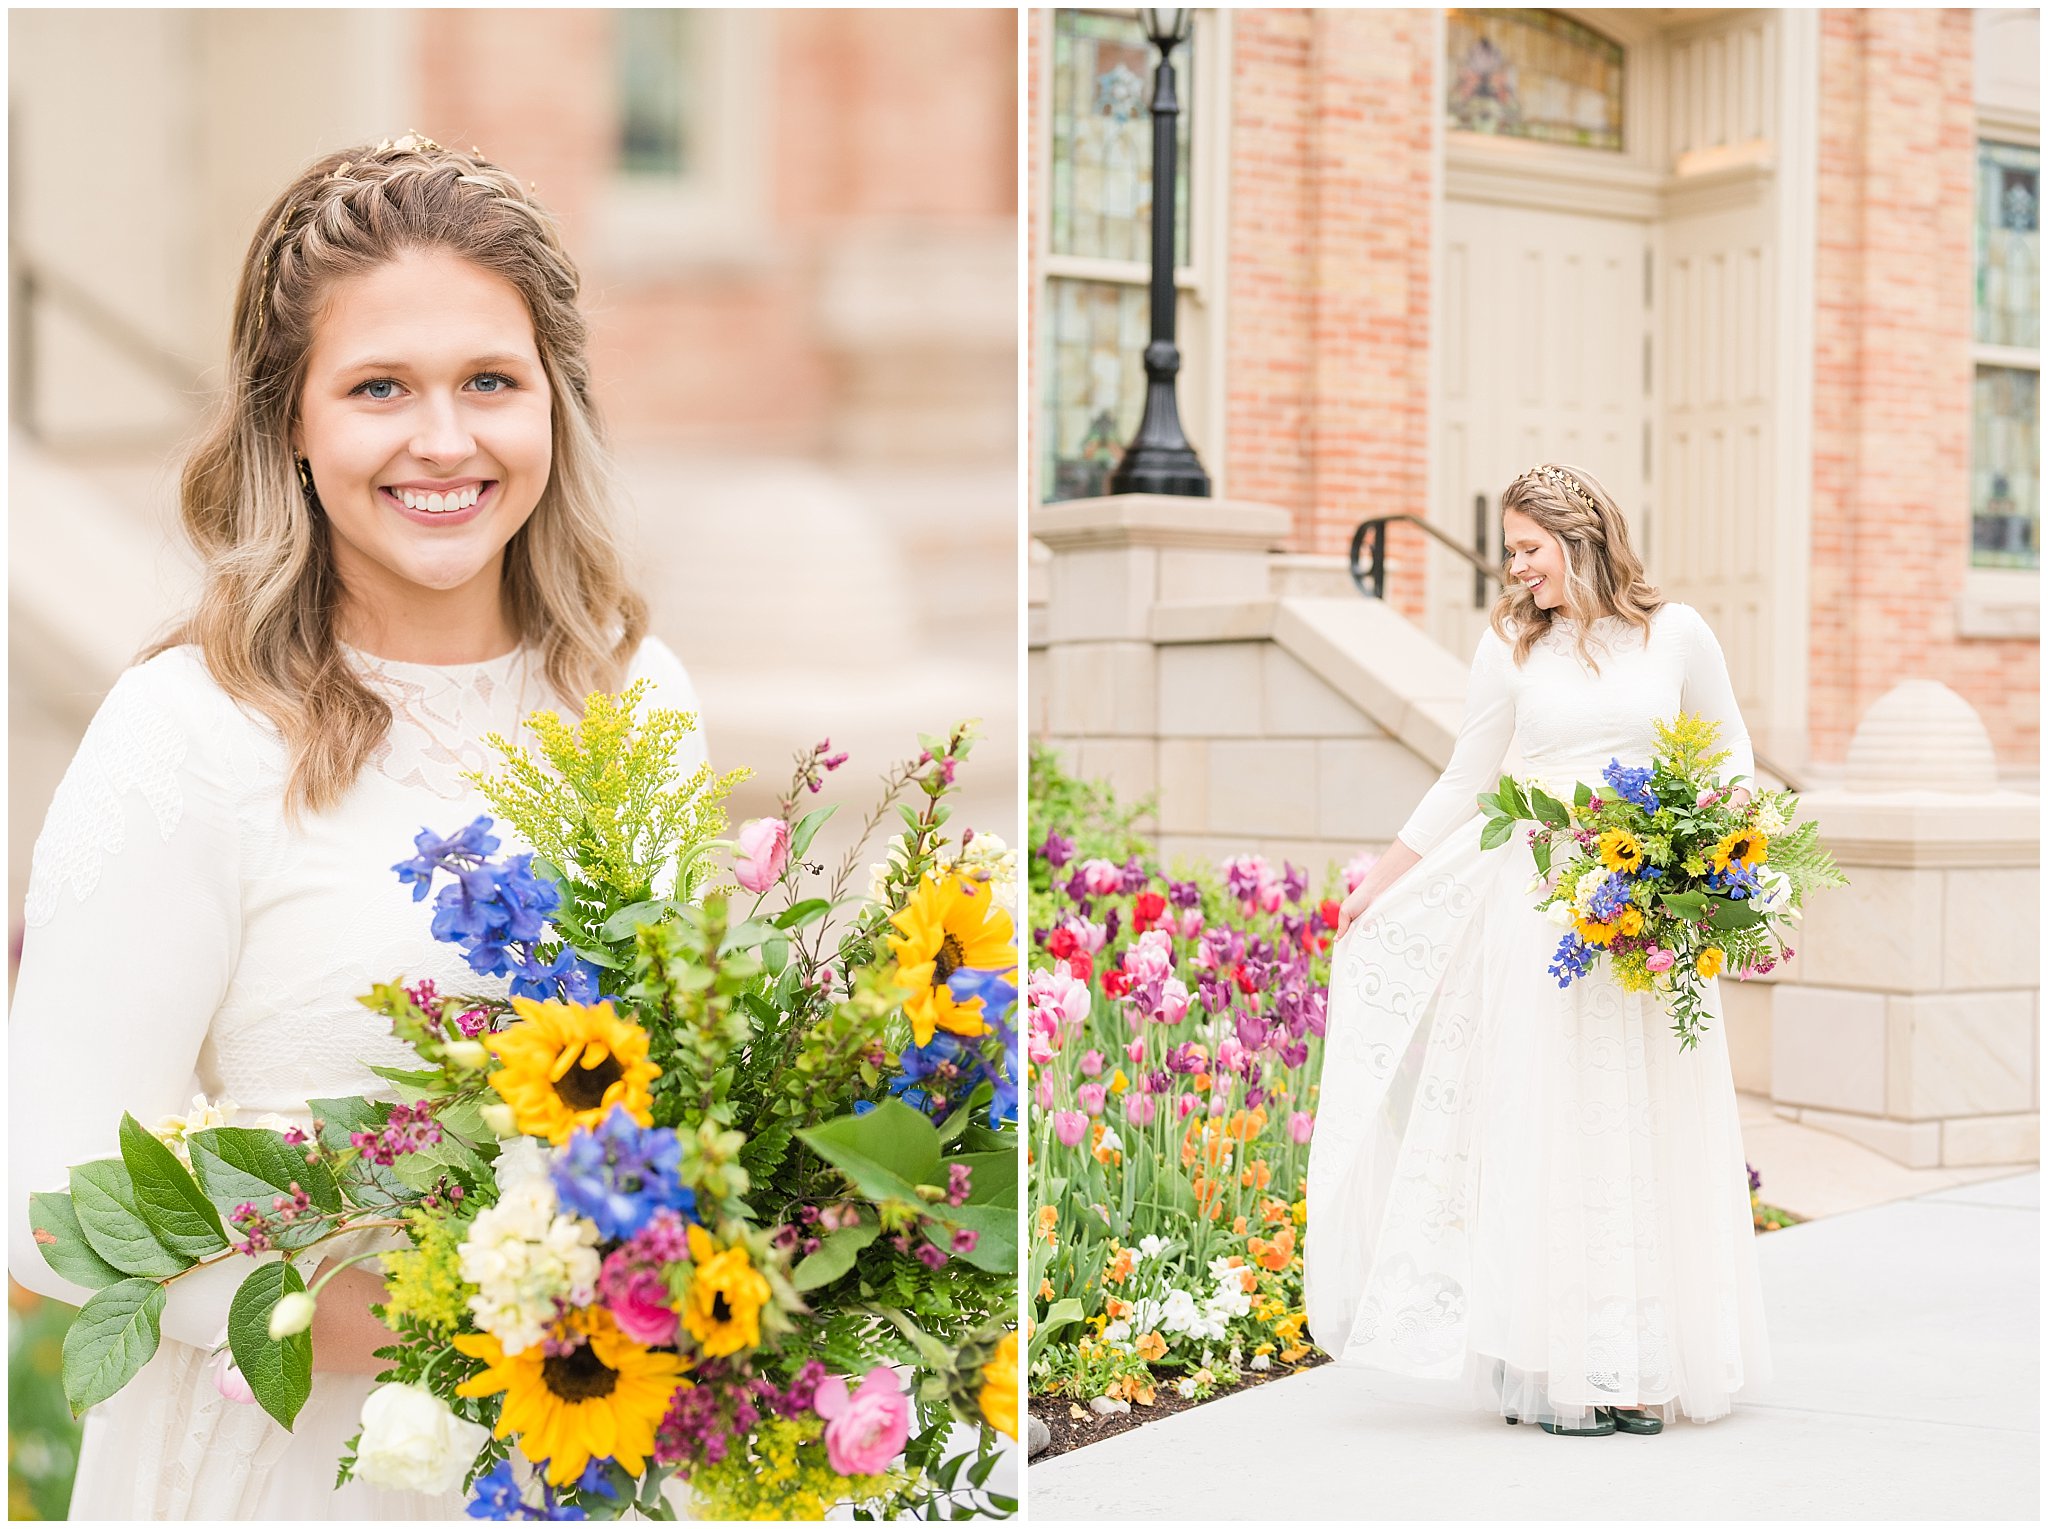 Bride wearing flowy dress with colorful bouquet for vintage inspired wedding attire | Emerald green, gold wedding colors | Provo City Center Temple Spring Formal Session | Jessie and Dallin Photography